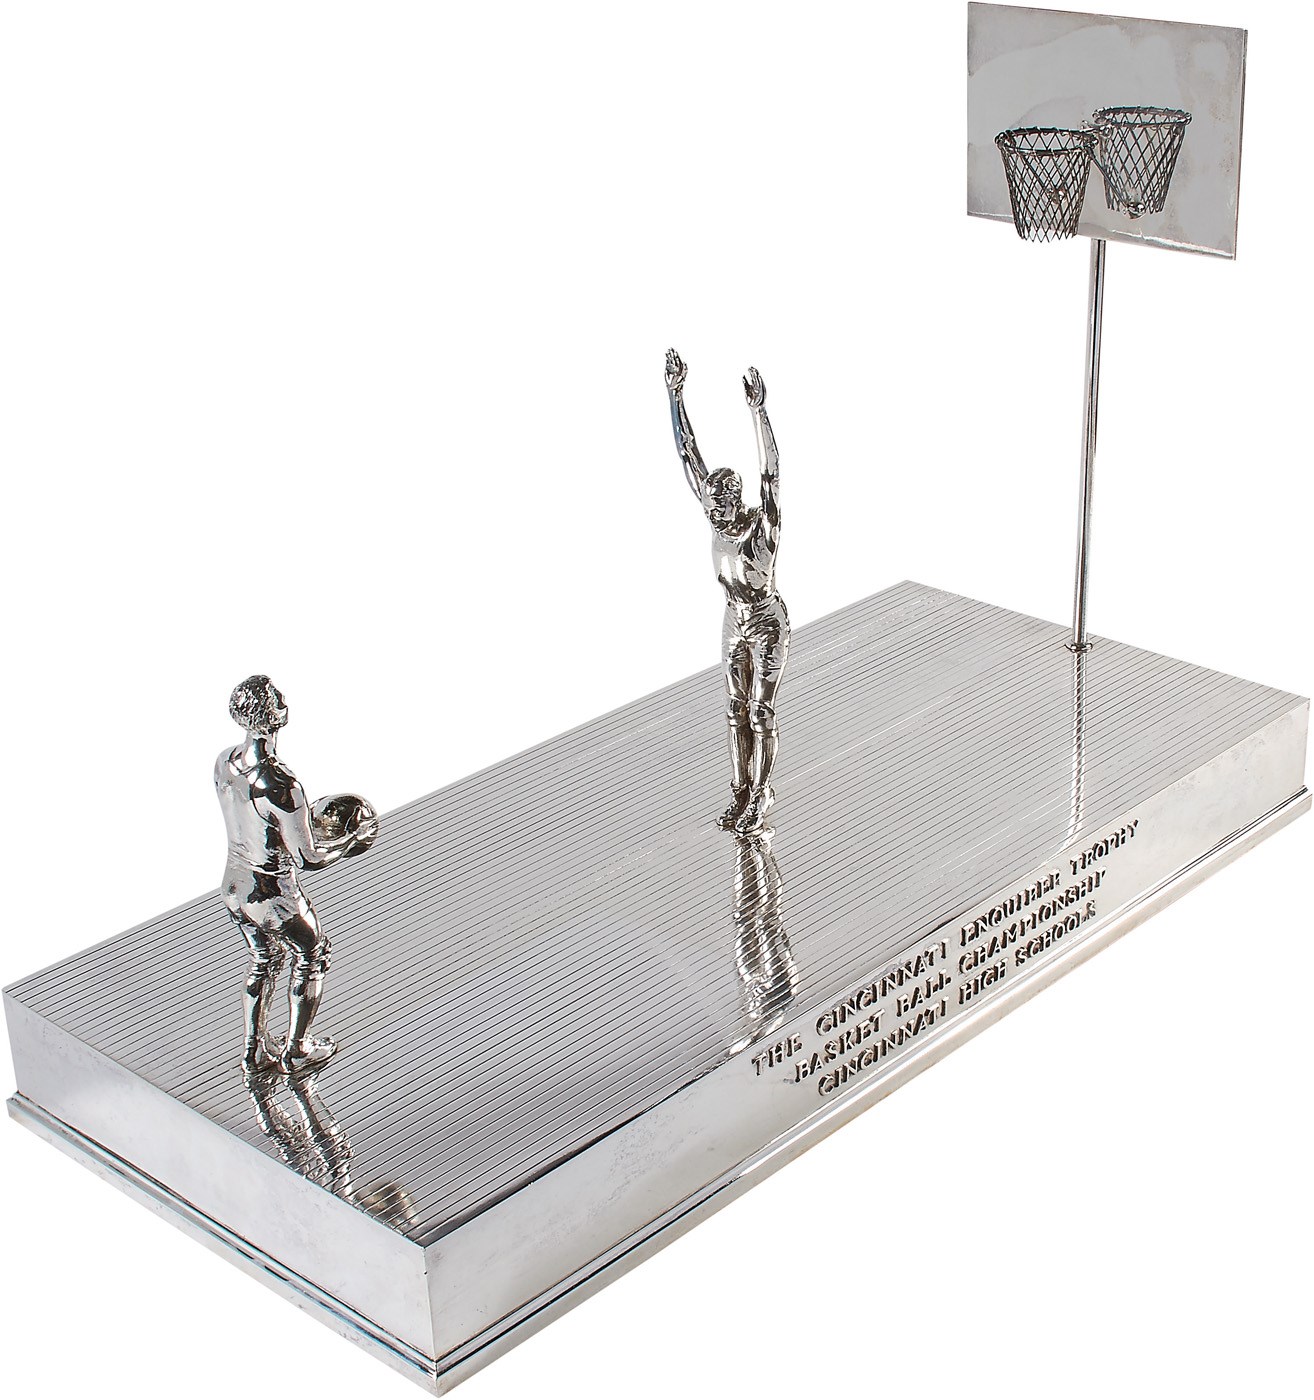 - The Finest Basketball Trophy Extant - 100% Sterling Silver Weighing 25.5 lbs